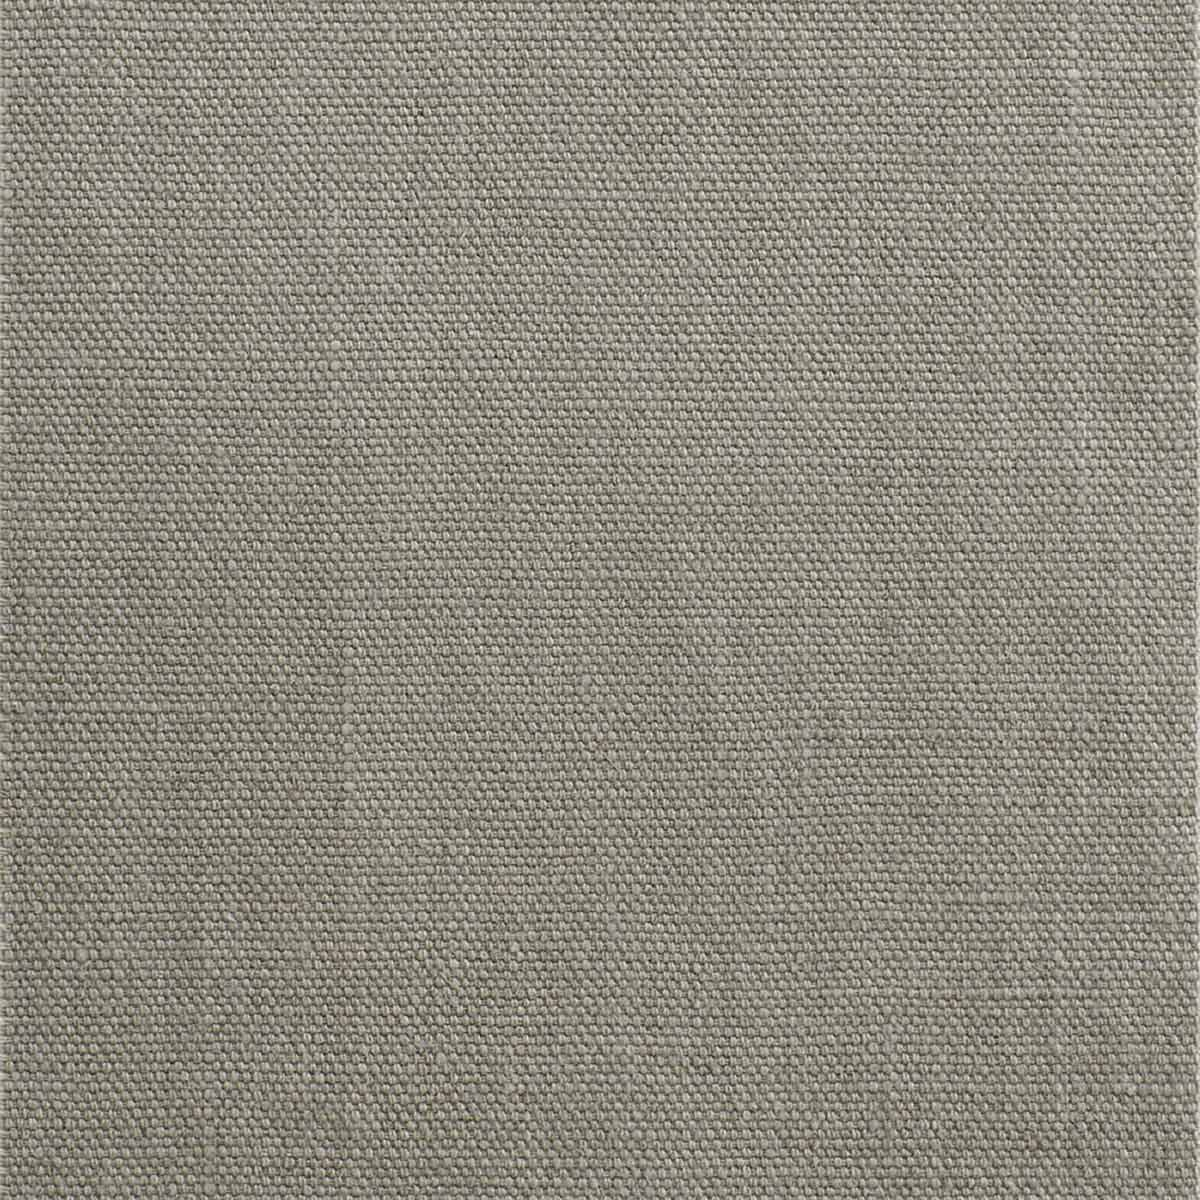 Sage Green Textured Upholstery Fabric, Fabric Bistro, Columbia